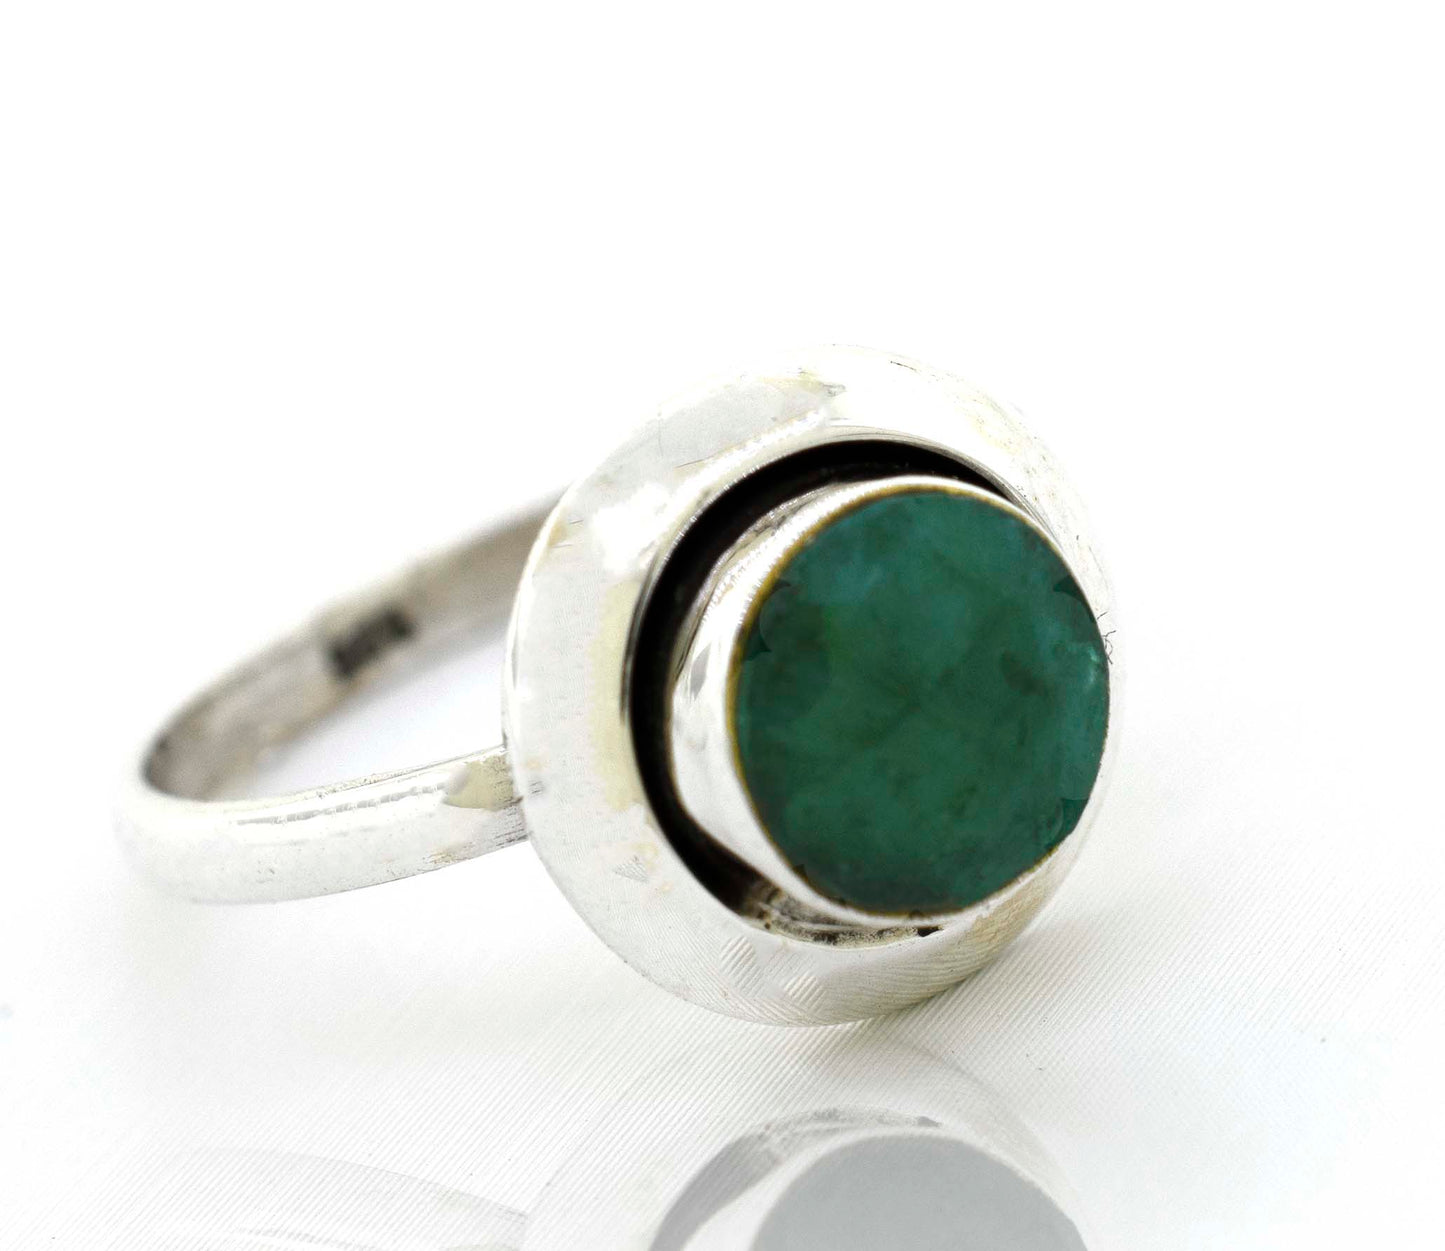 A boho-inspired Round Gemstone Ring With Oxidized Outline with an emerald stone.